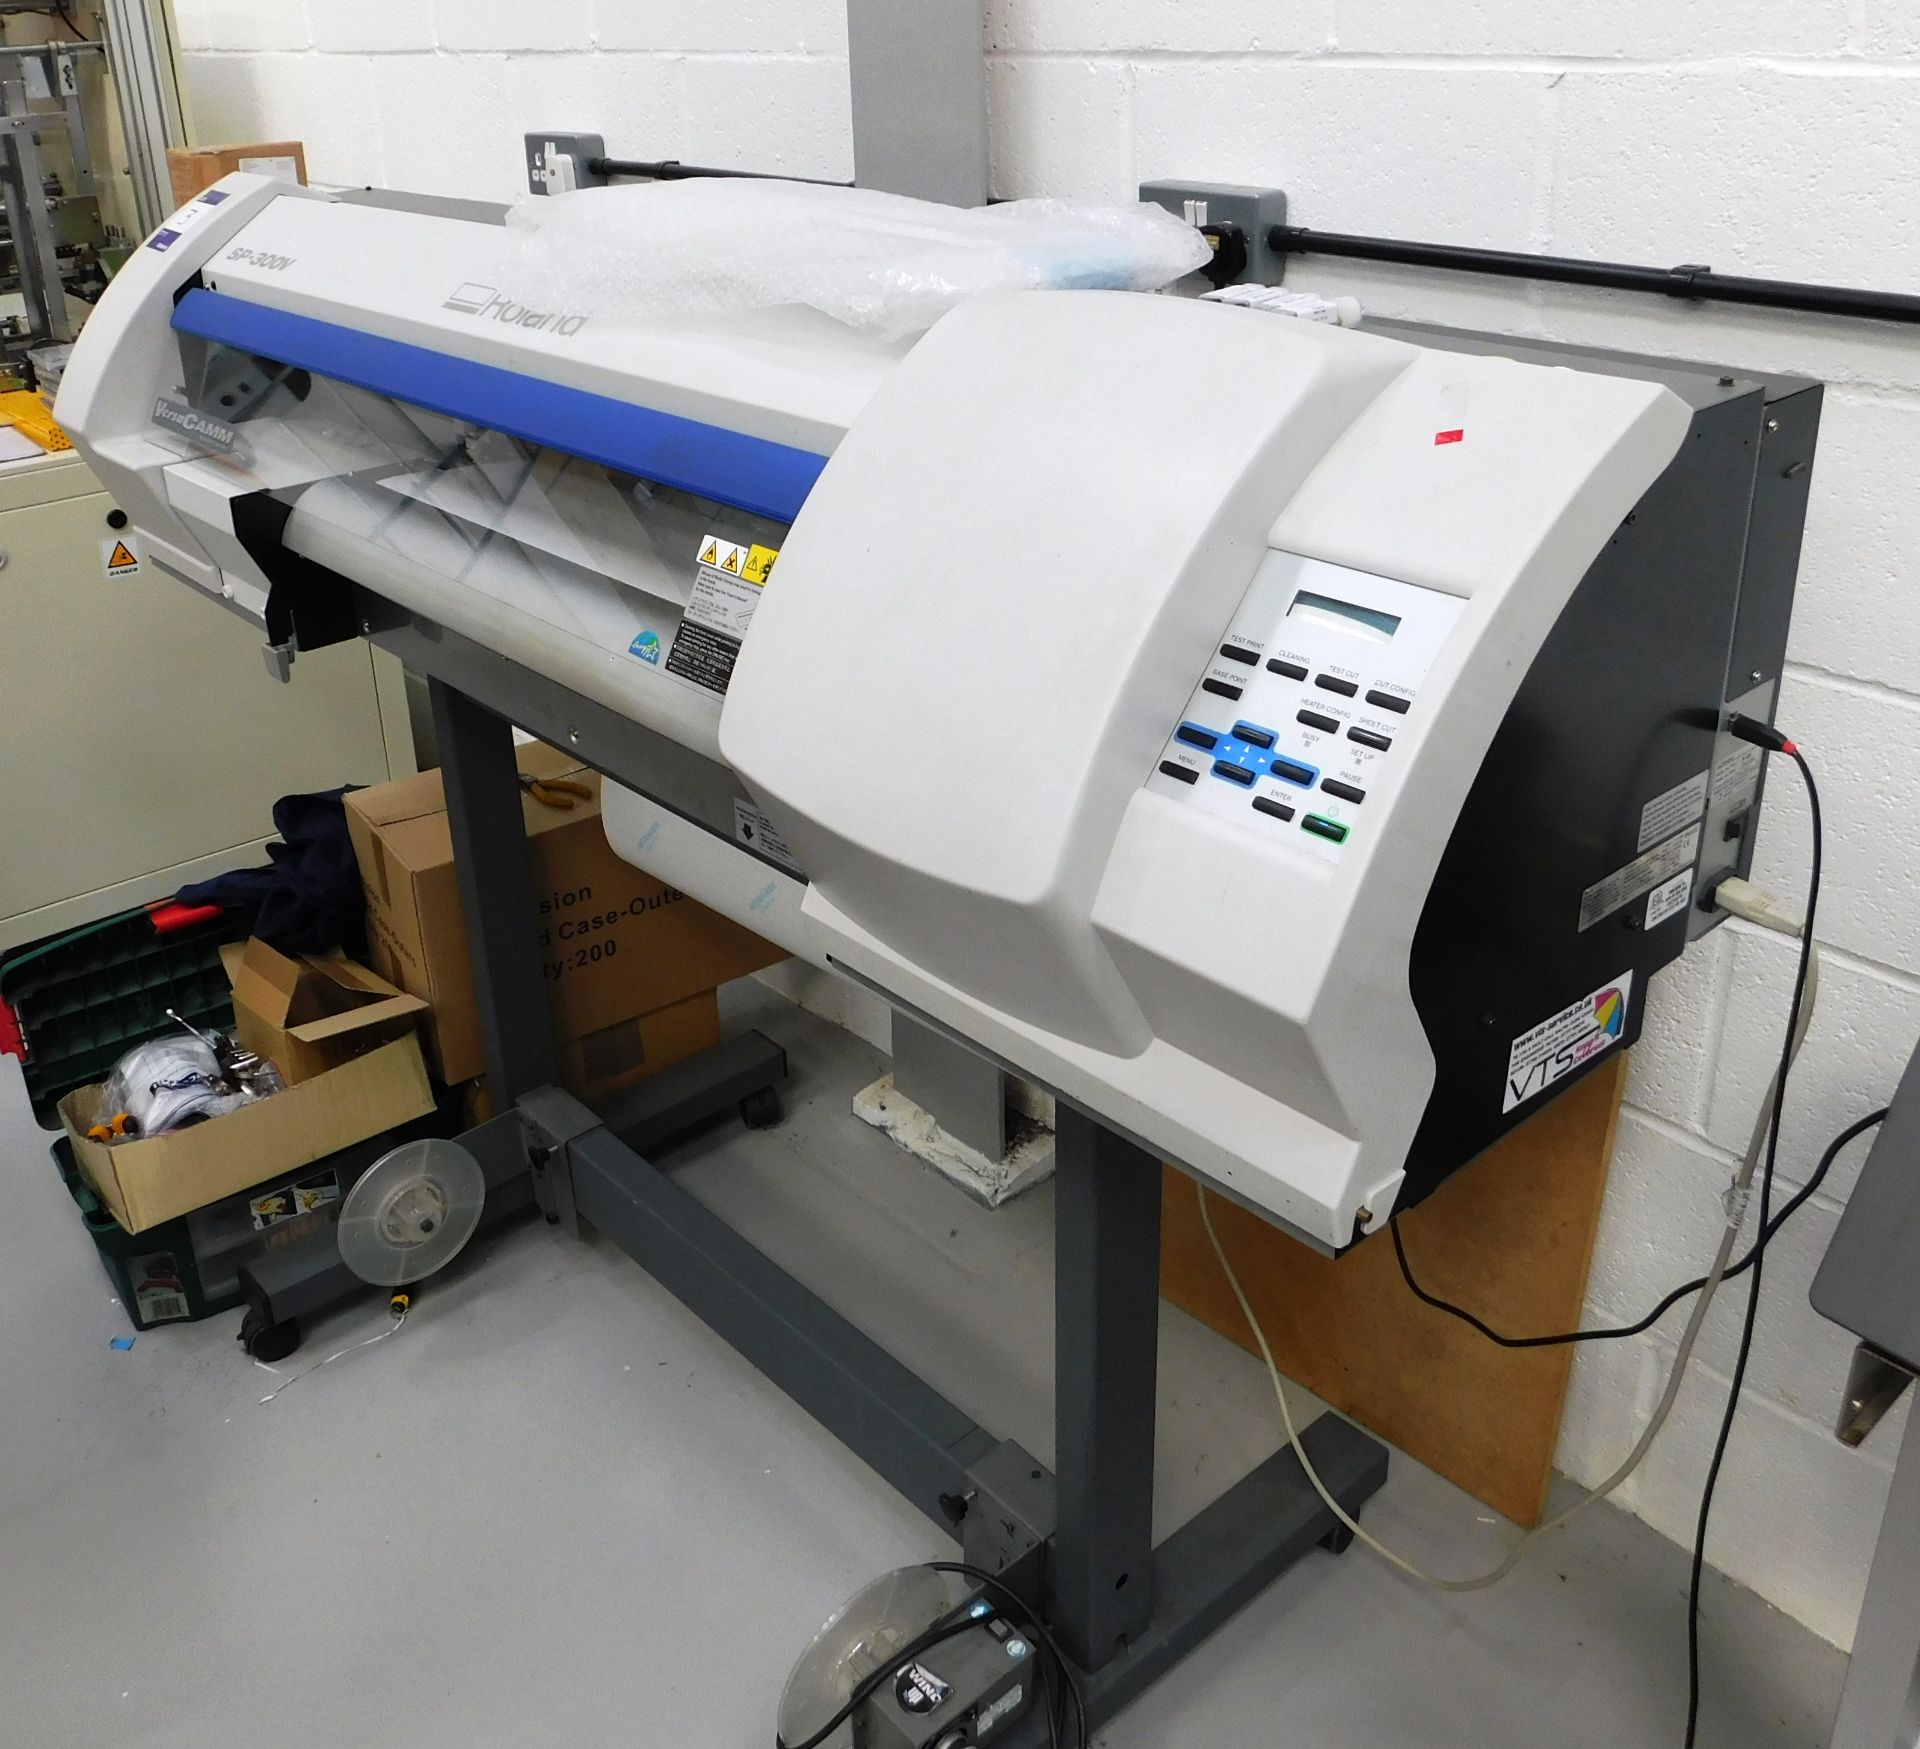 Roland SP300 Printer Cutter, Serial Number ZS80288 - Image 2 of 3